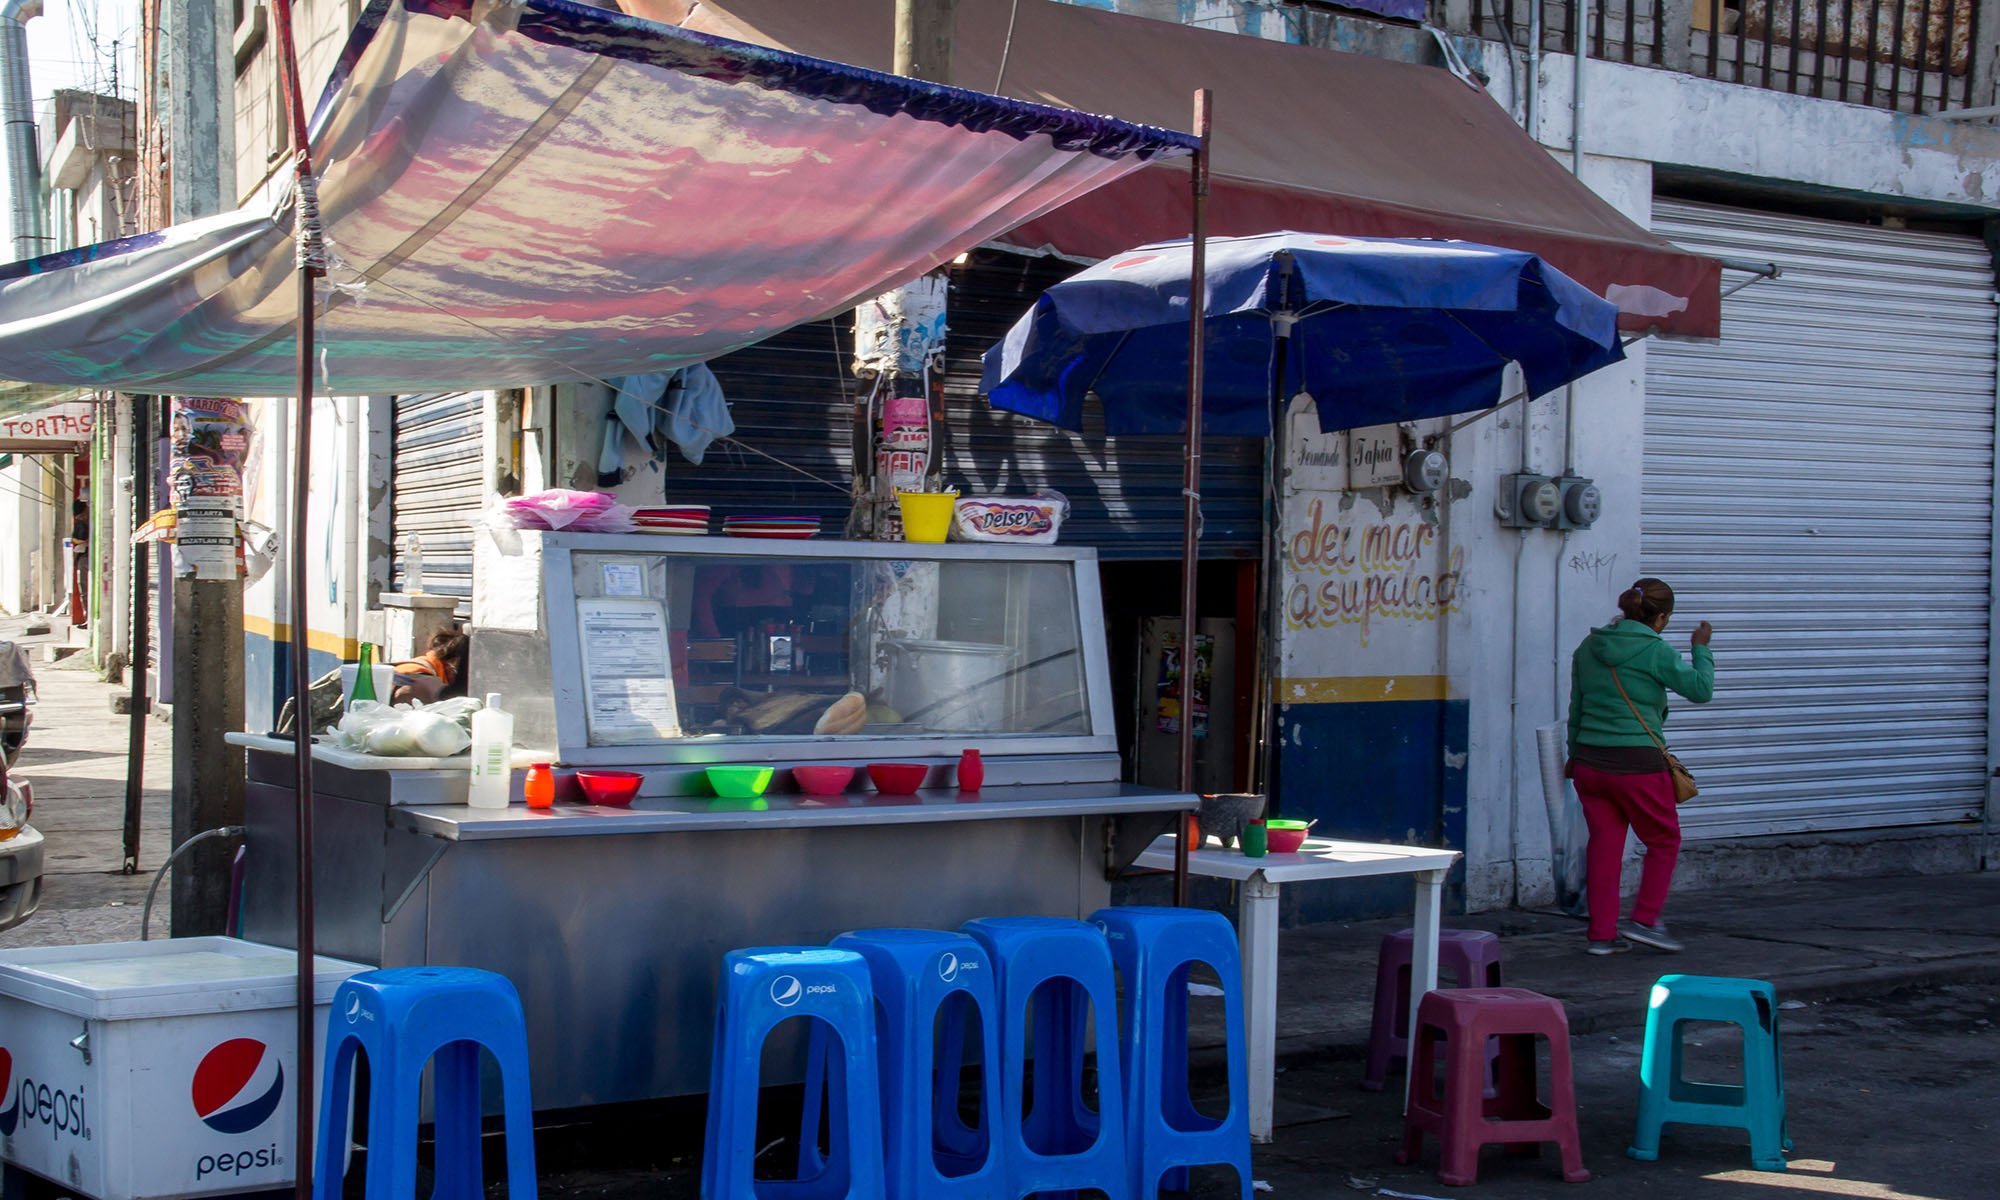 A local woman passes by Karla Agullon’s taco stand called “Tacos el knockout” (“The Knockout”), which is located in Mercado General Escobedo, the oldest market in Santiago de Querétaro.